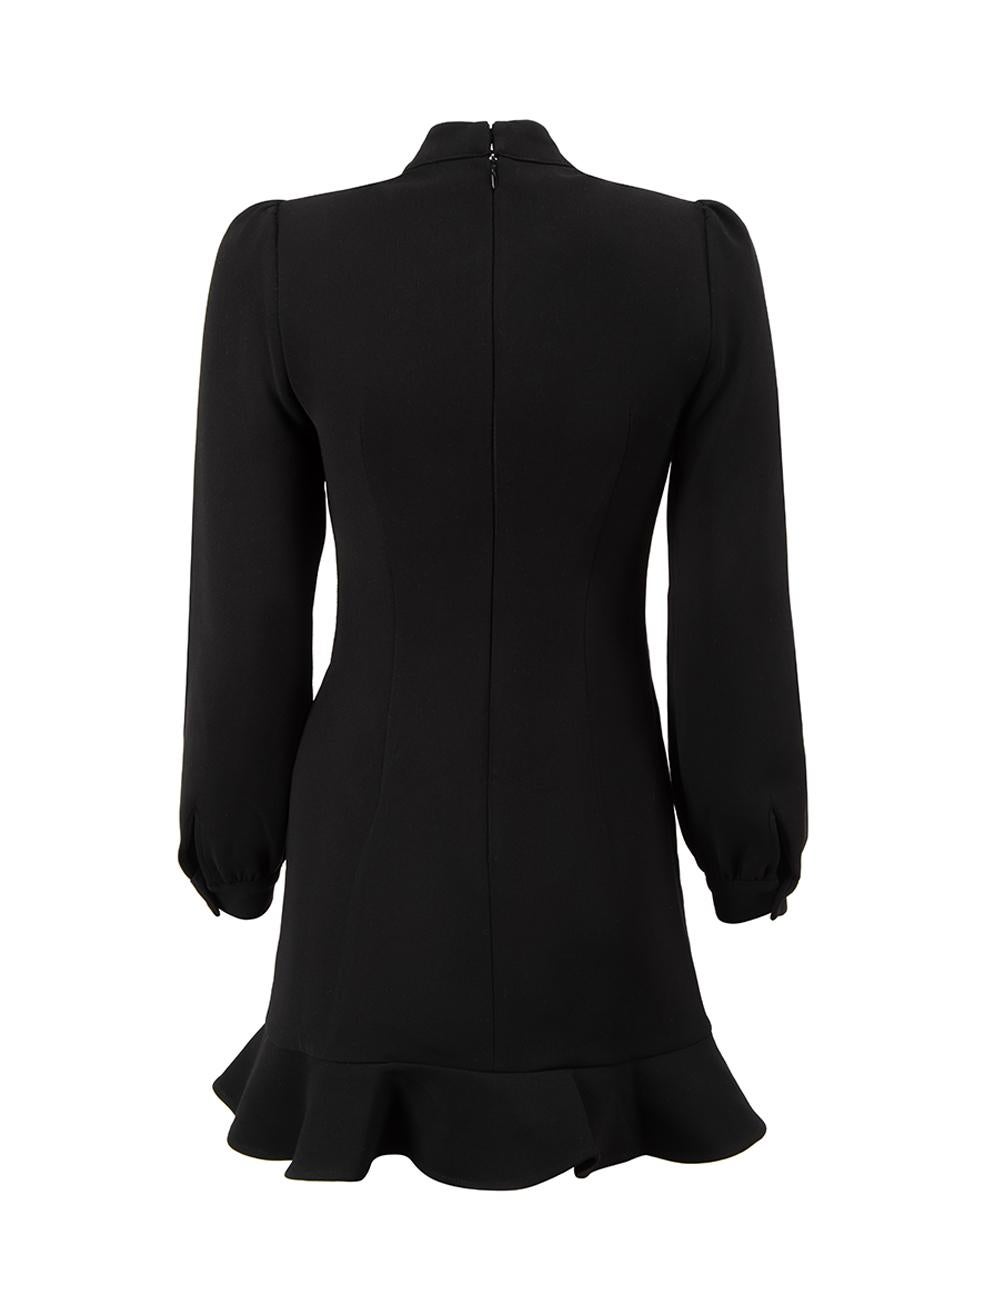 CONDITION is Never Worn. No visible wear to dress is evident on this used Self-Portrait designer resale item.

Details
Black
Polyester
Dress
Long sleeves
Round mock neck
Crystal embellished
Mini
Ruffle detail and skirt hem
Buttoned cuffs
Back zip